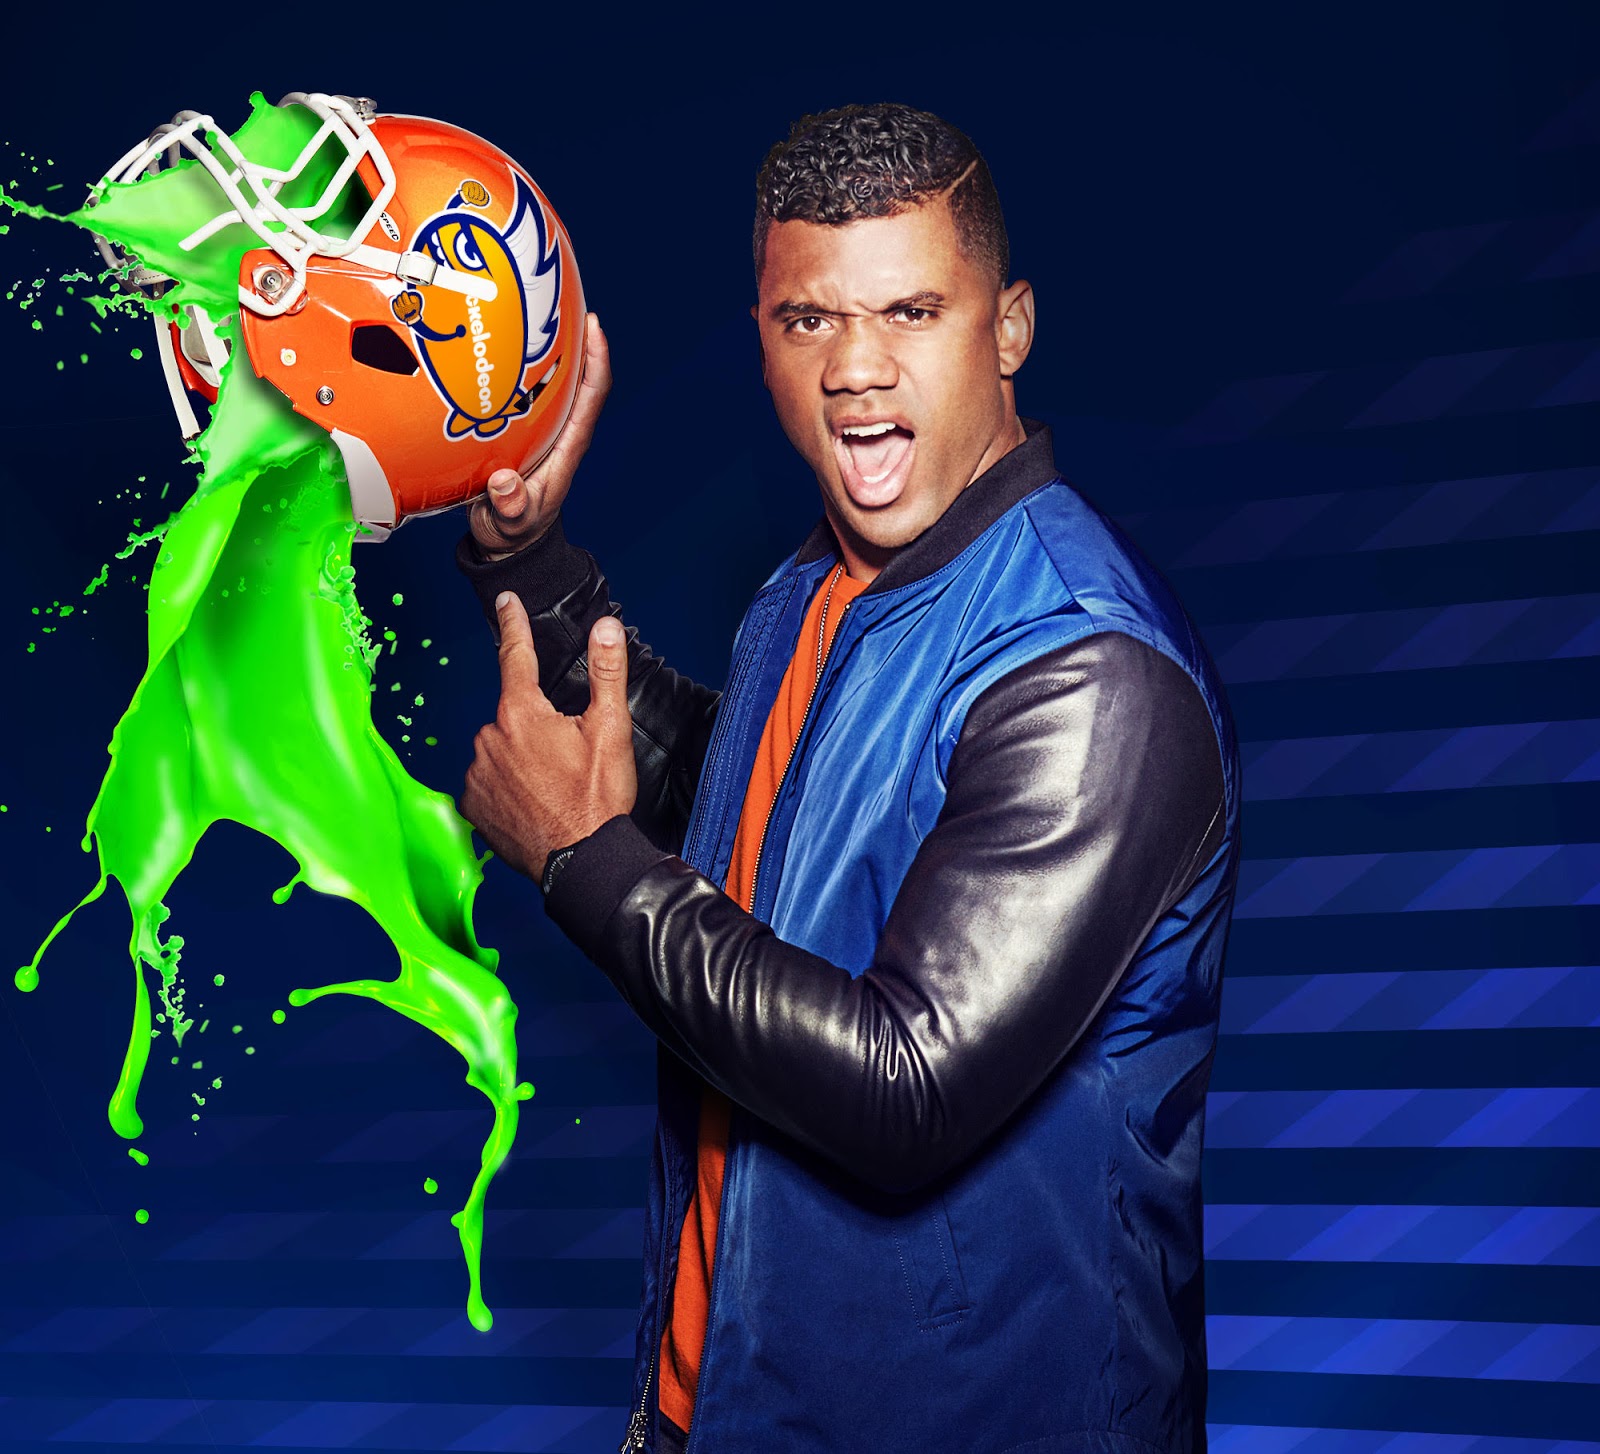 Kids' Choice Sports 2017: Russell Wilson Gets Slimed - (Video Clip